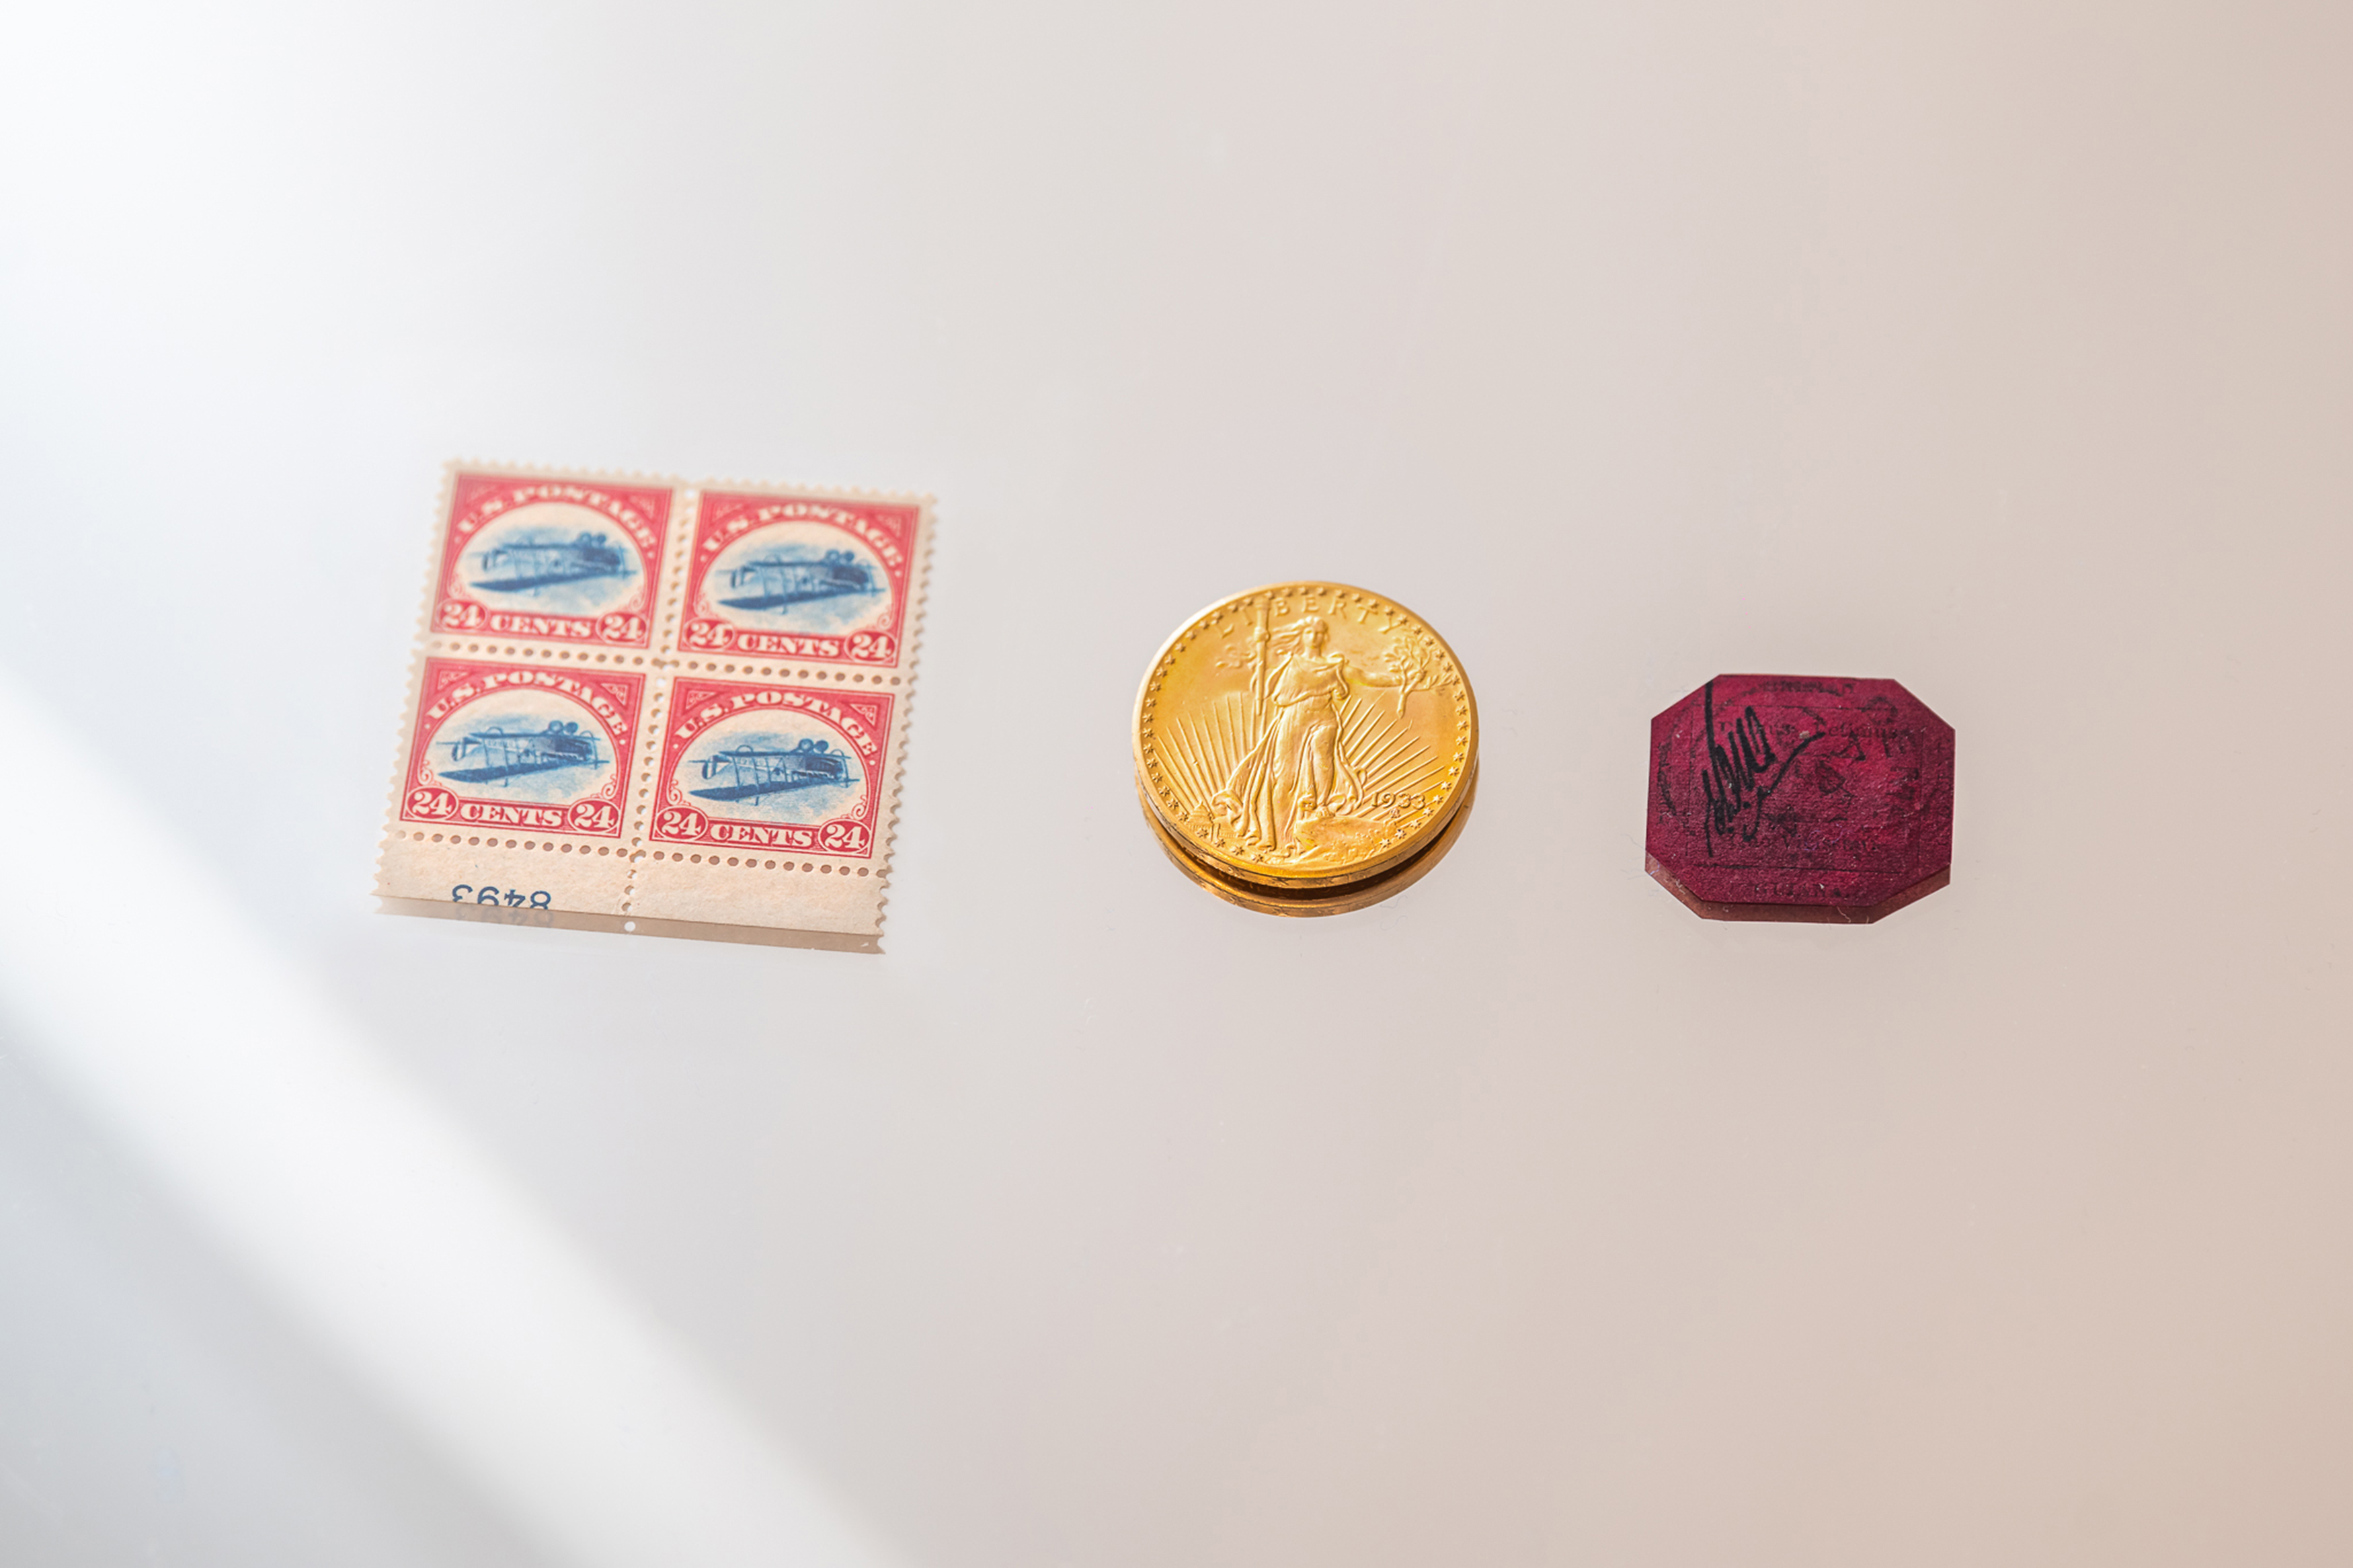 He Owns World Famous Stamps and a Prized Coin. Now He's Selling